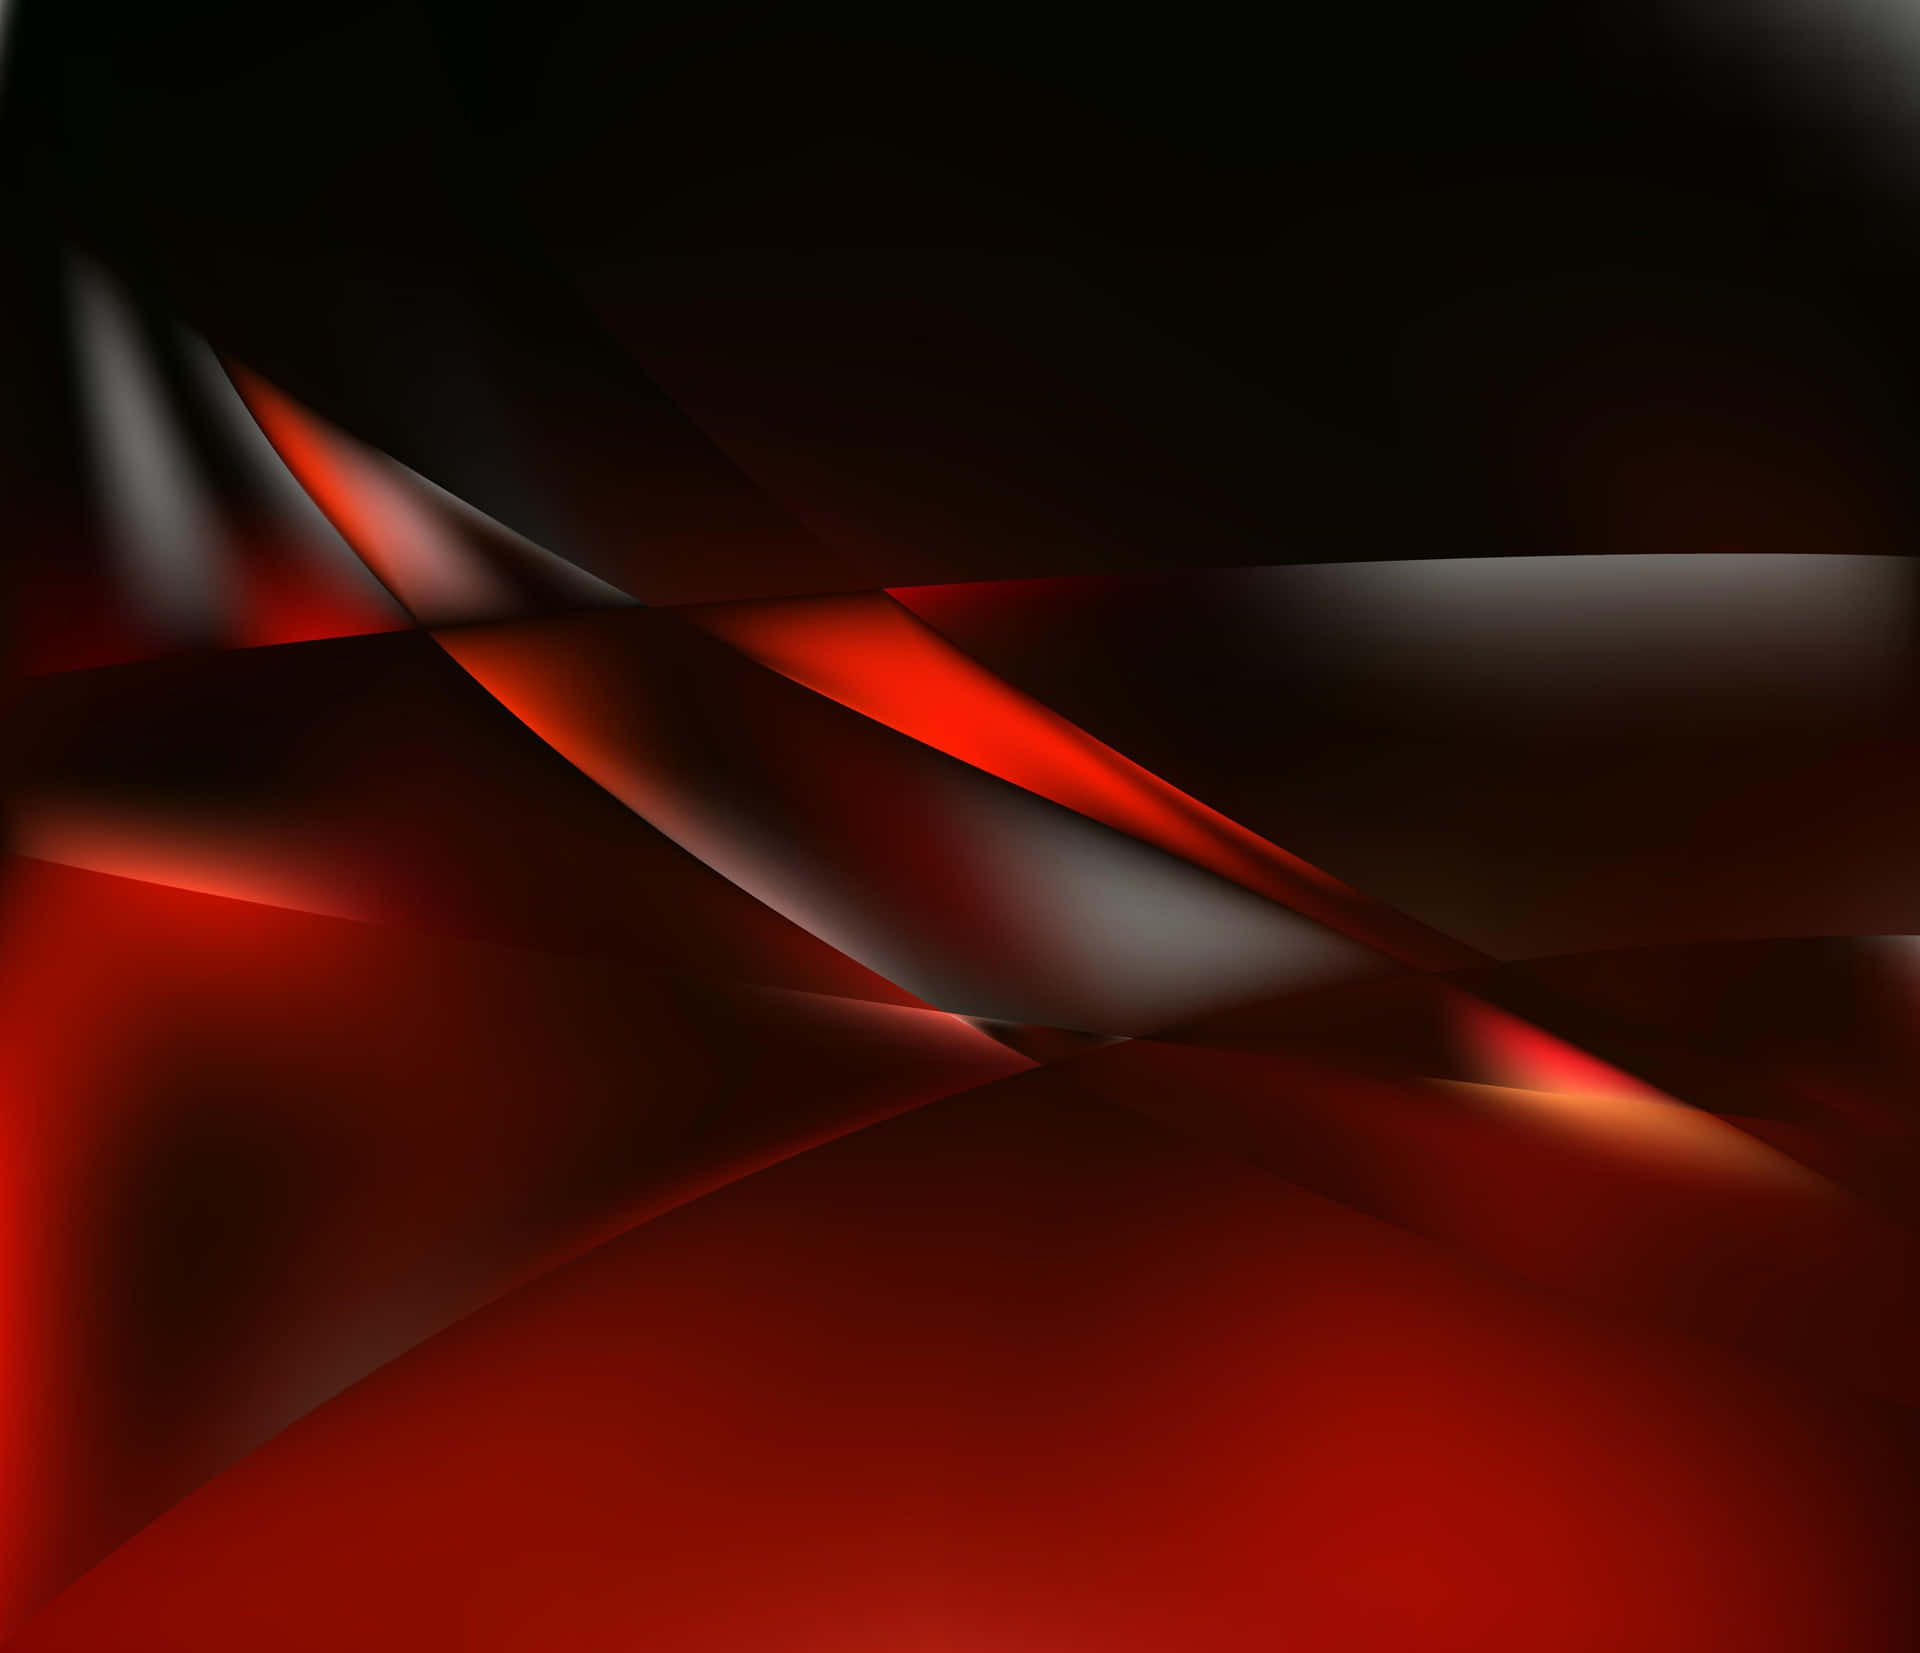 An ultra-HD red and black background